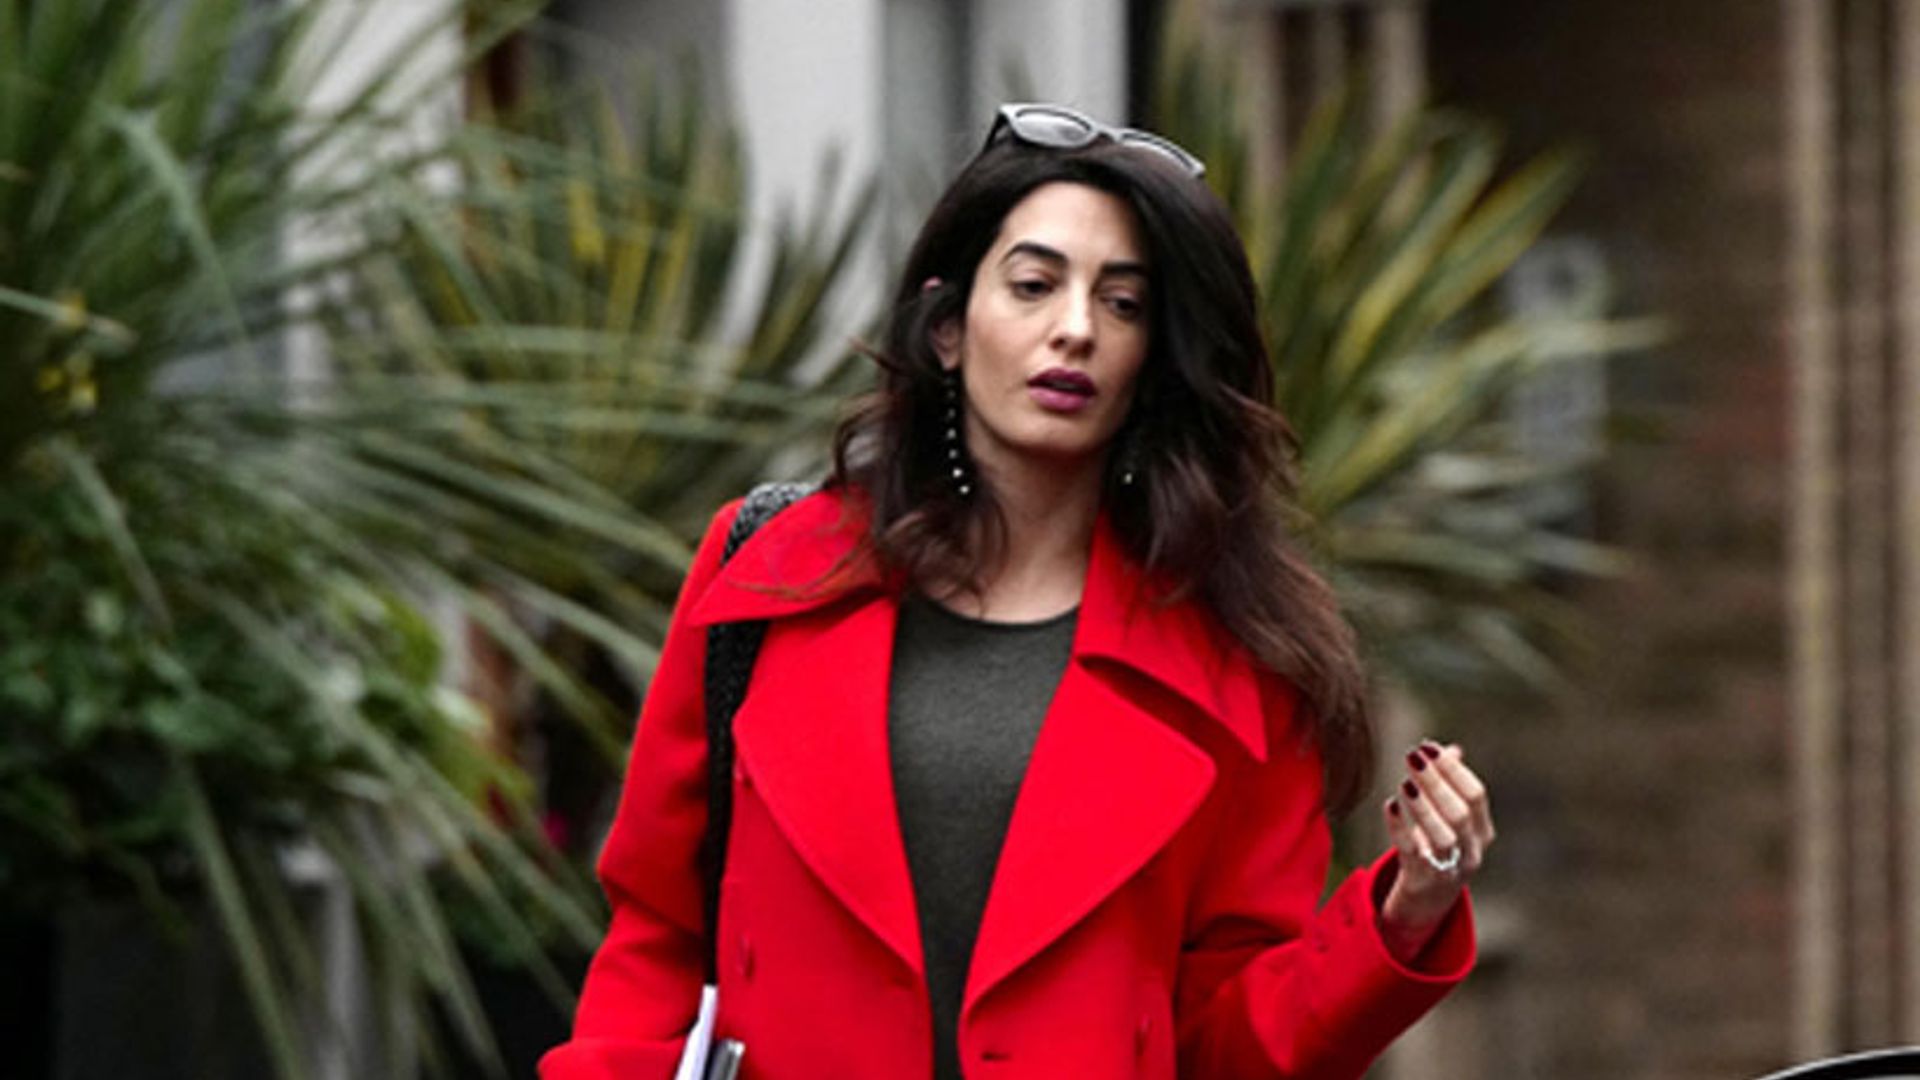 Amal Clooney stuns in red as she steps out with twin baby bump: pics!